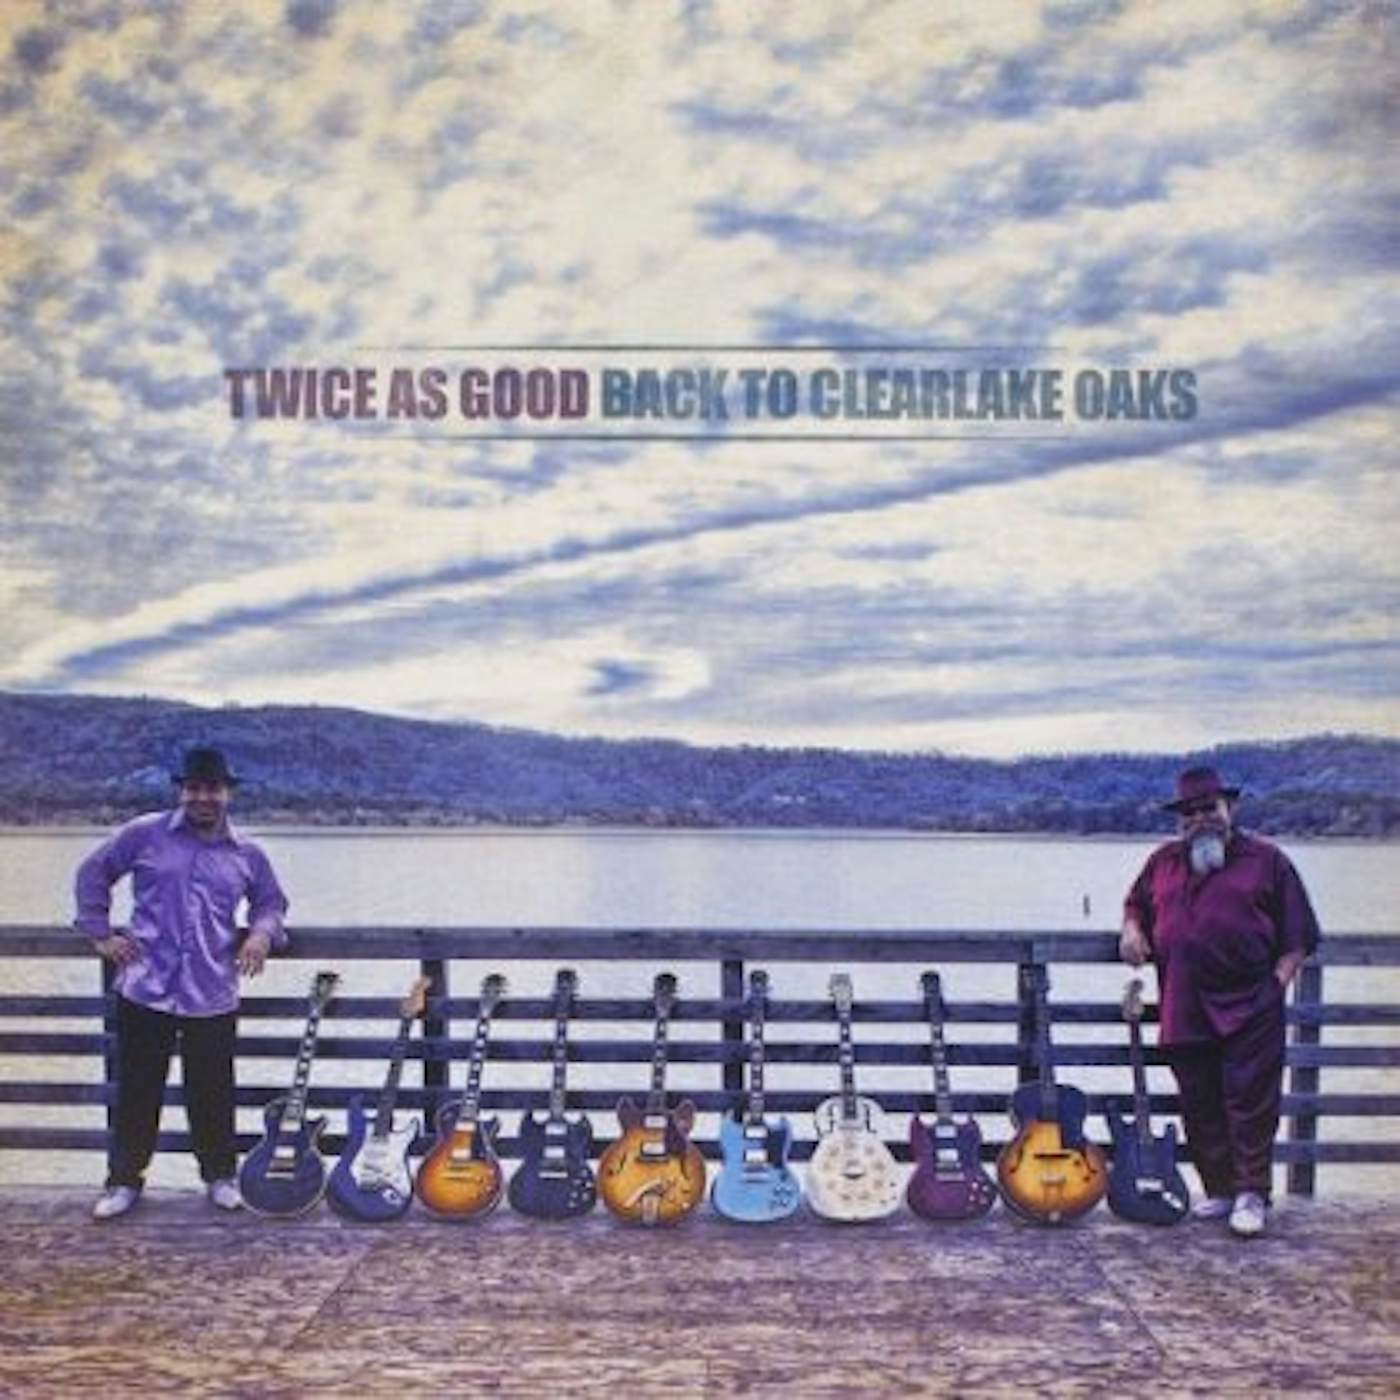 Twice As Good BACK TO CLEARLAKE OAKS CD